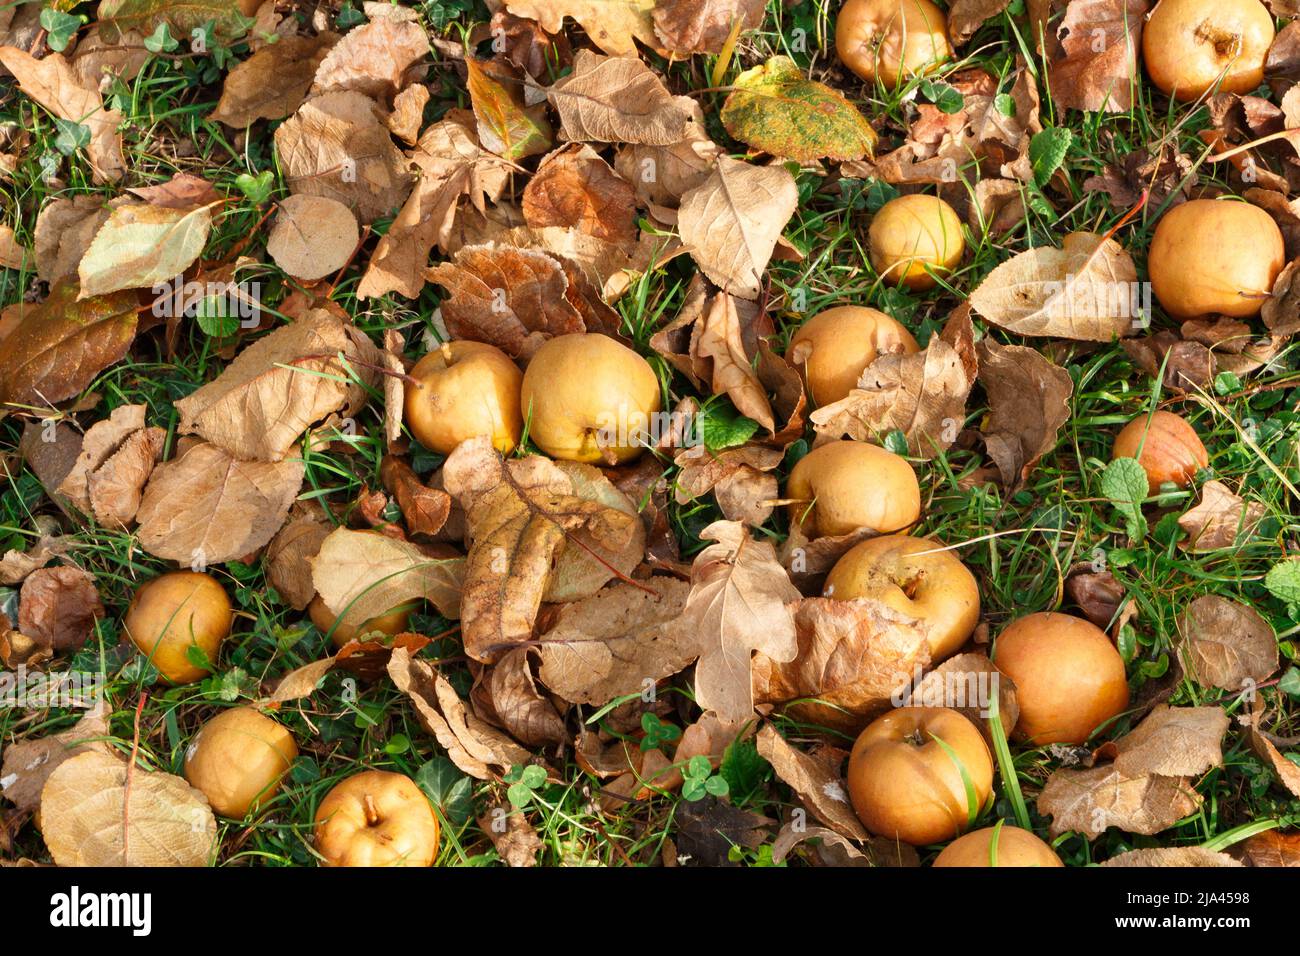 Apples and dead leaves on the ground during autumn Stock Photo